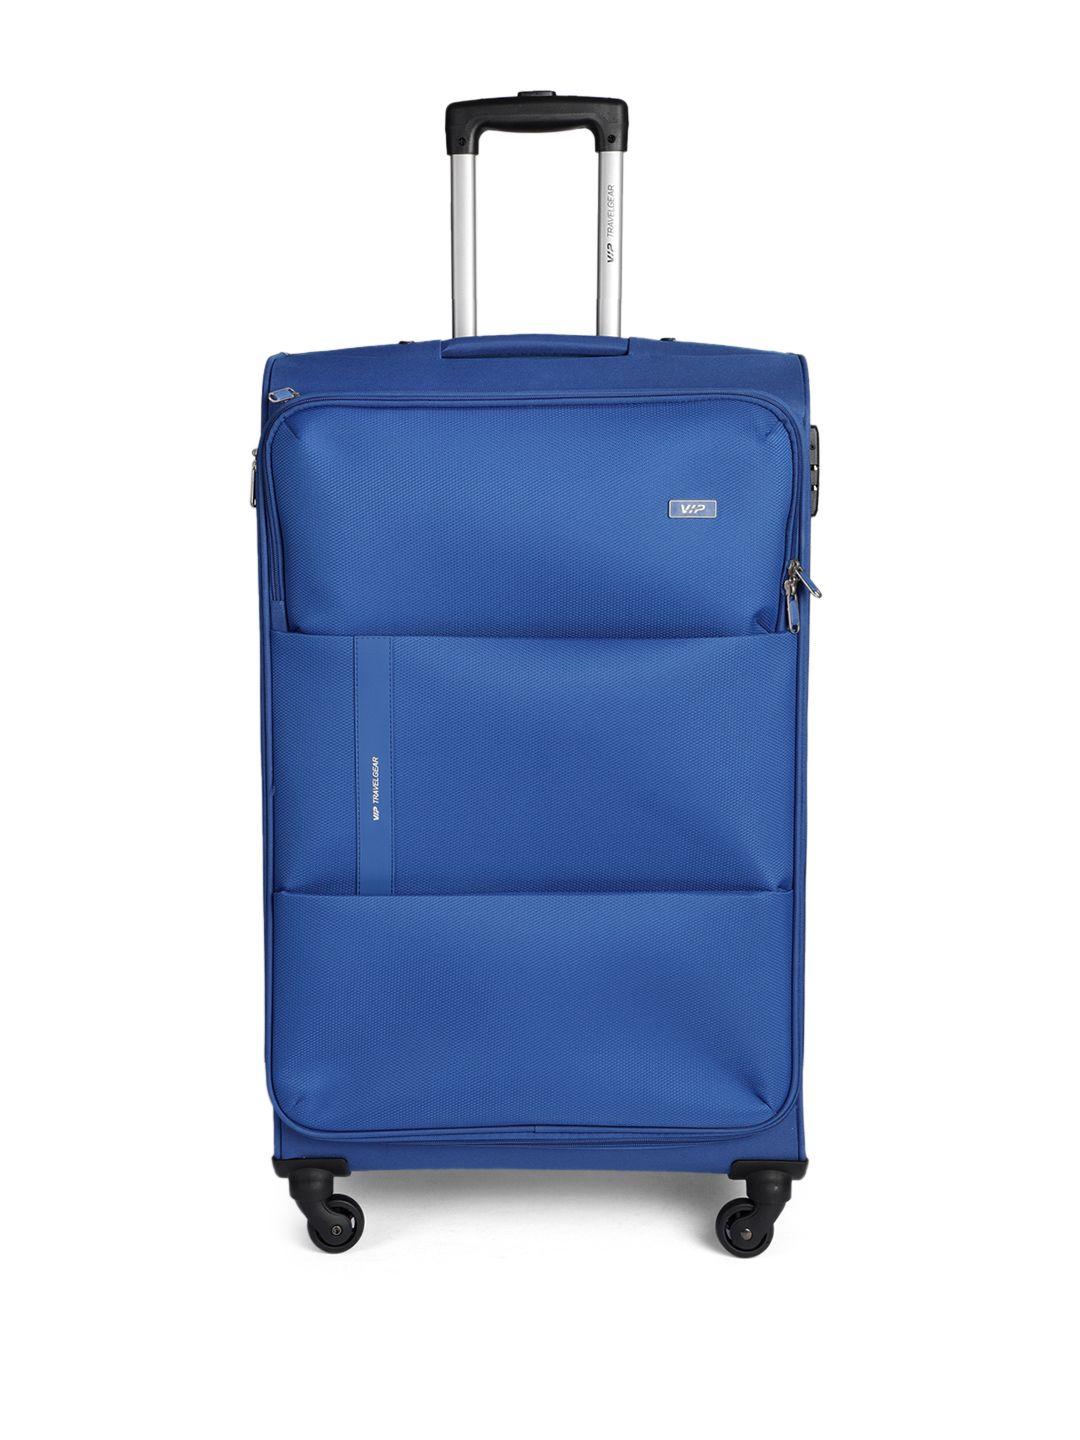 vip blue solid large 360 degree rotatable trolley suitcase